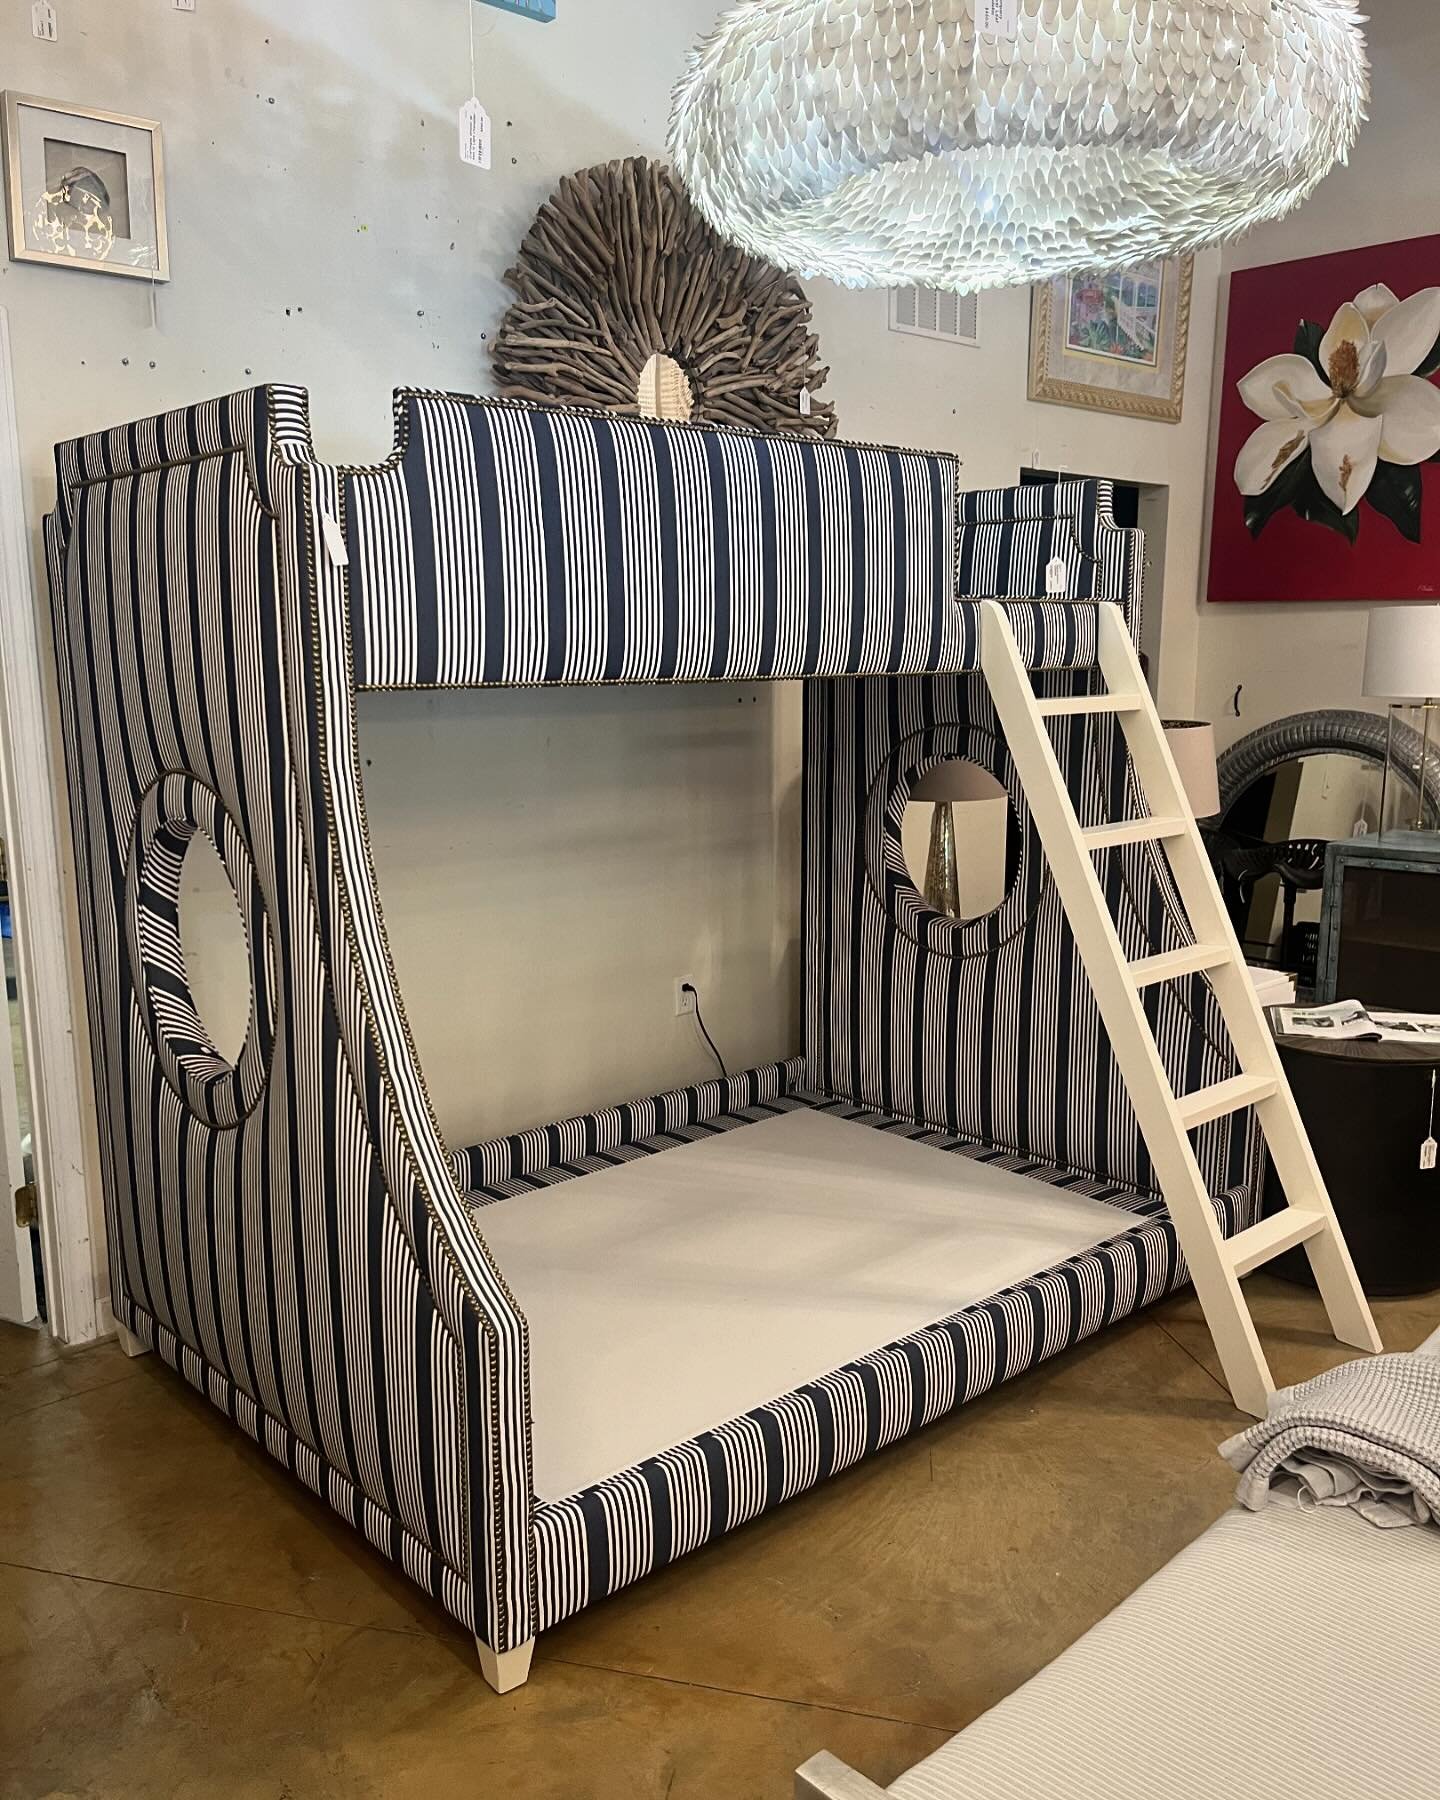 🚨JUST IN🚨
AFK Furniture Custom Gramercy Porthole Twin/Full Bunkbed 🤩
❌Retail $8500 
✨Our Price $4295
Call (850) 267-0064 to purchase!! It won&rsquo;t last long 😍

#resortresale #santarosabeach #hey30a #30a #sowal #southwalton #interiordesign #int